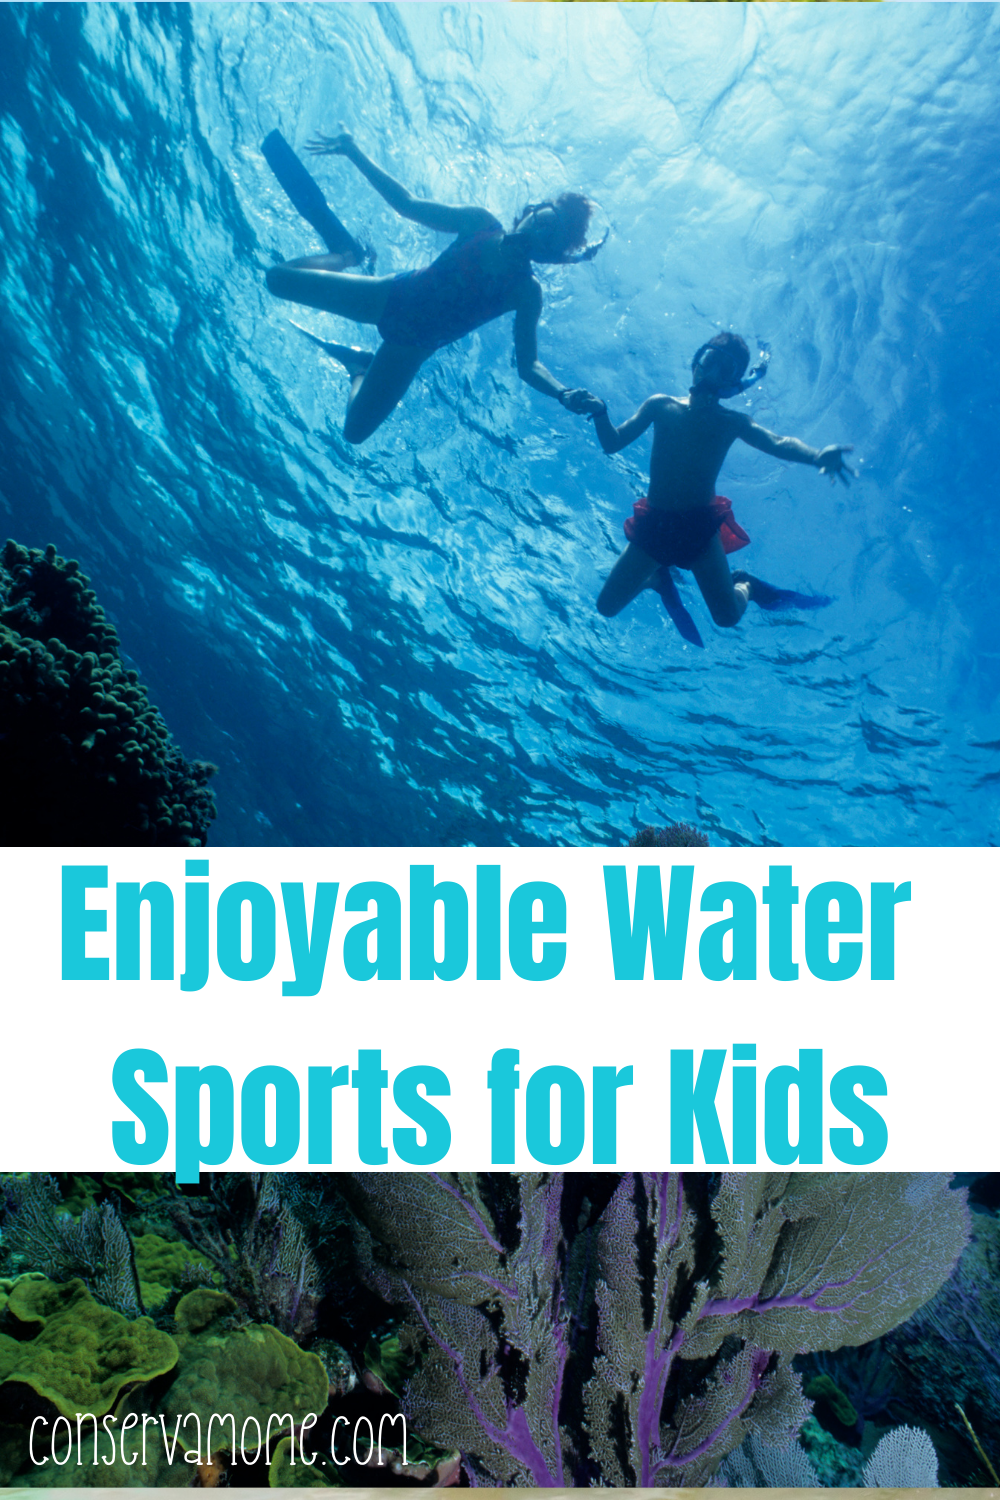 Enjoyable water sports for kids